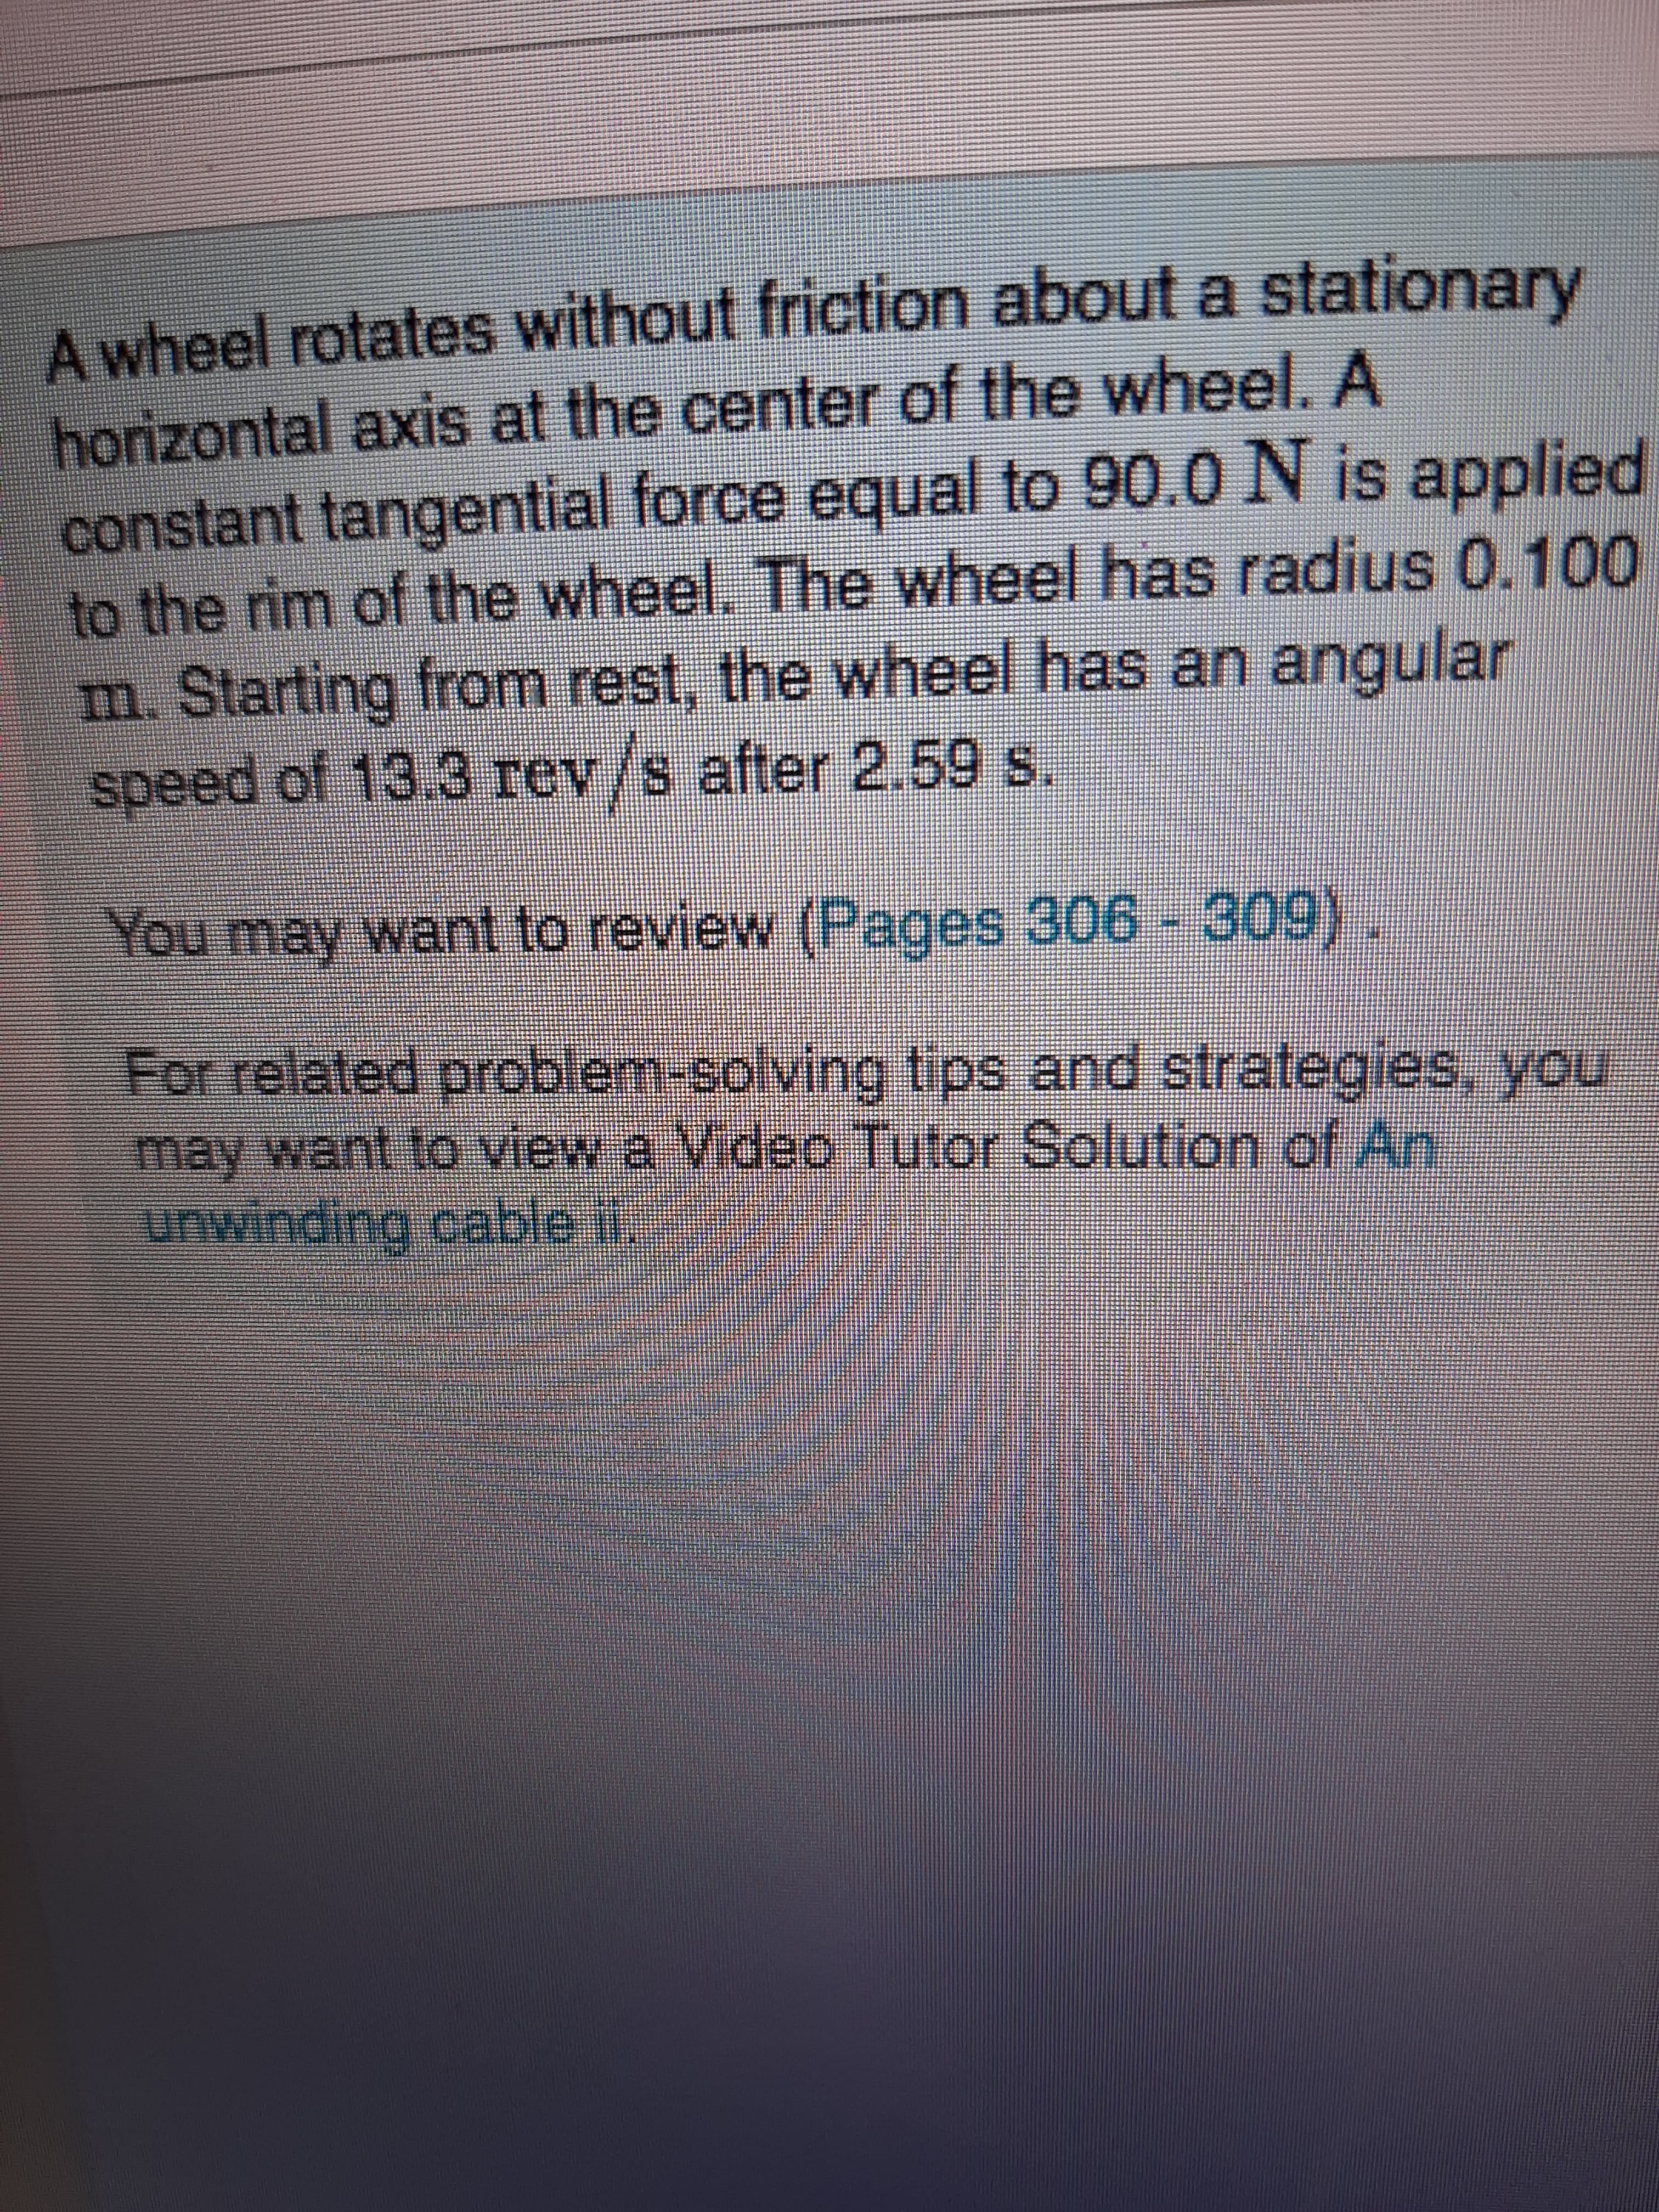 A wheel rotates without friction about a stationary
horizontal axis at the center of the wheel. A
constant tangential force equal to 90.0 N is applied
to the rim of the wheel. The wheel has radius 0.100
m. Starting from rest, the wheel has an angular
speed of 13.3 rev/s after 2,59 s.
You may want to review (Pages 306 - 309).
For related problem-solving tips and strategies, you
may want to view a Video Tutor Solution of An
unwinding cable il,
